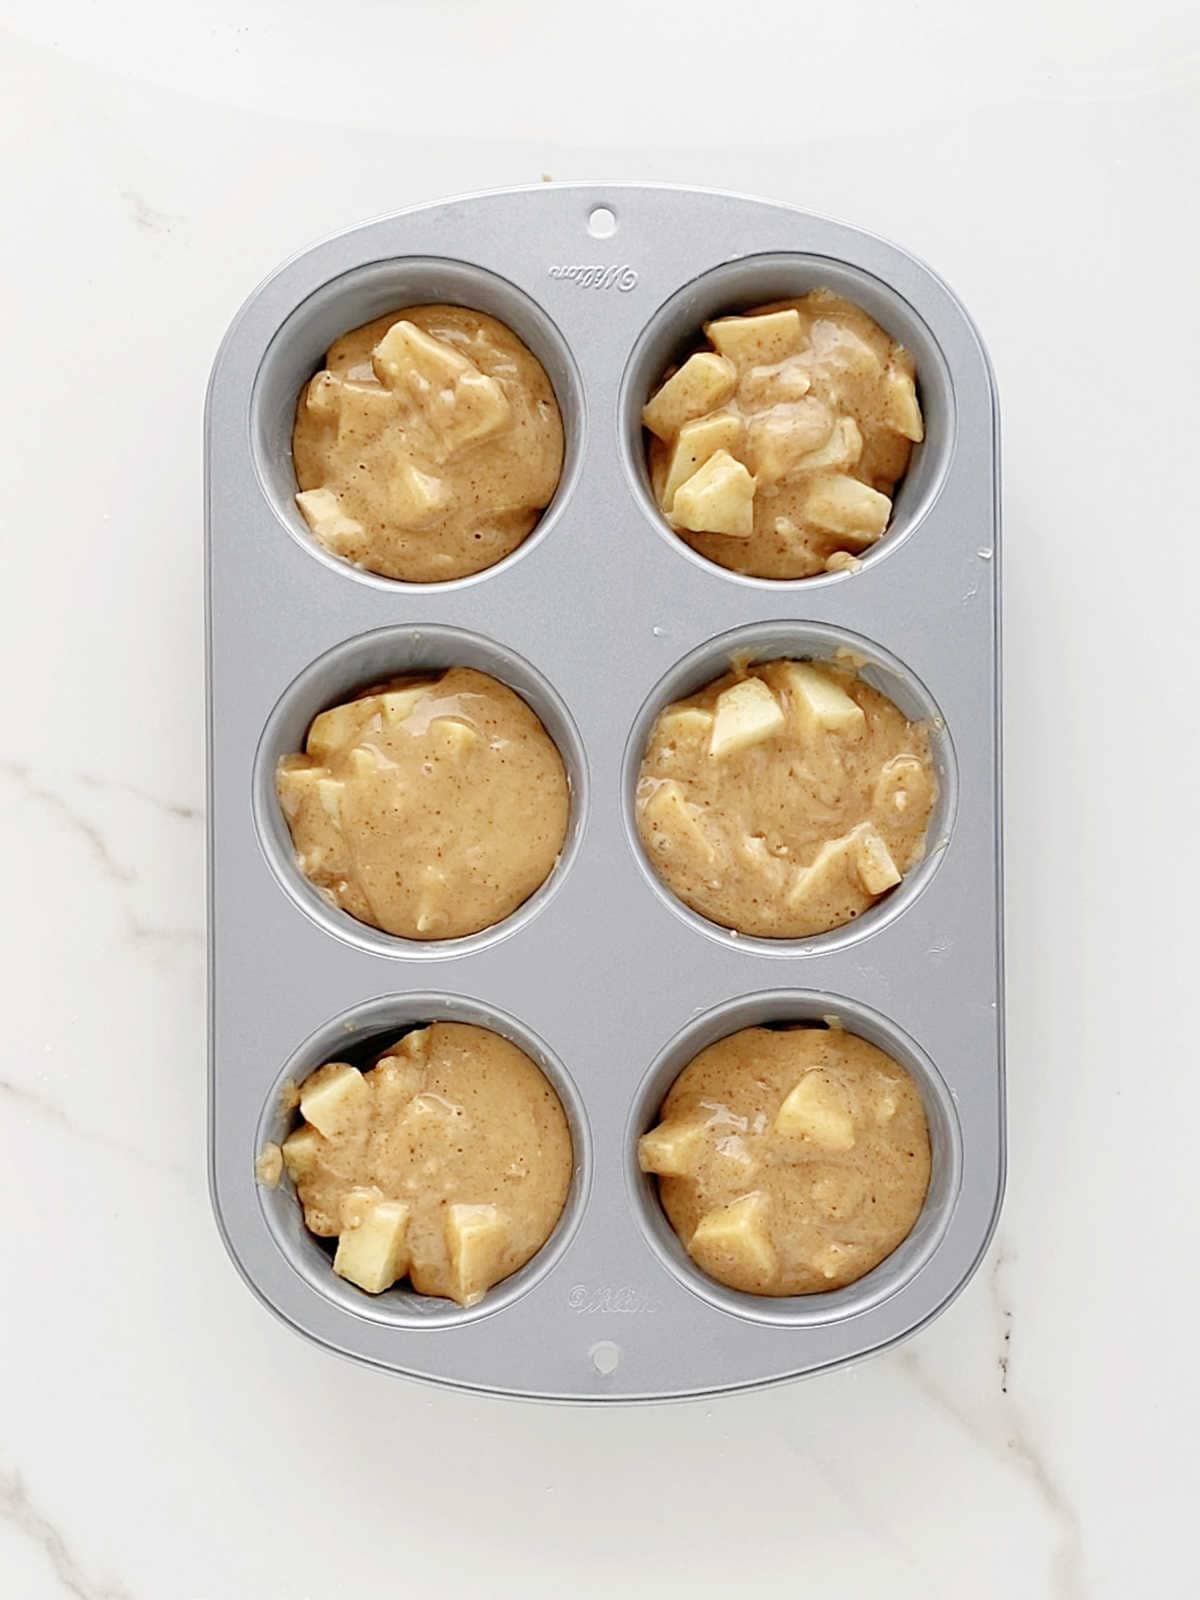 Apple muffins batter in jumbo metal pan on a white marbled surface. Top view.